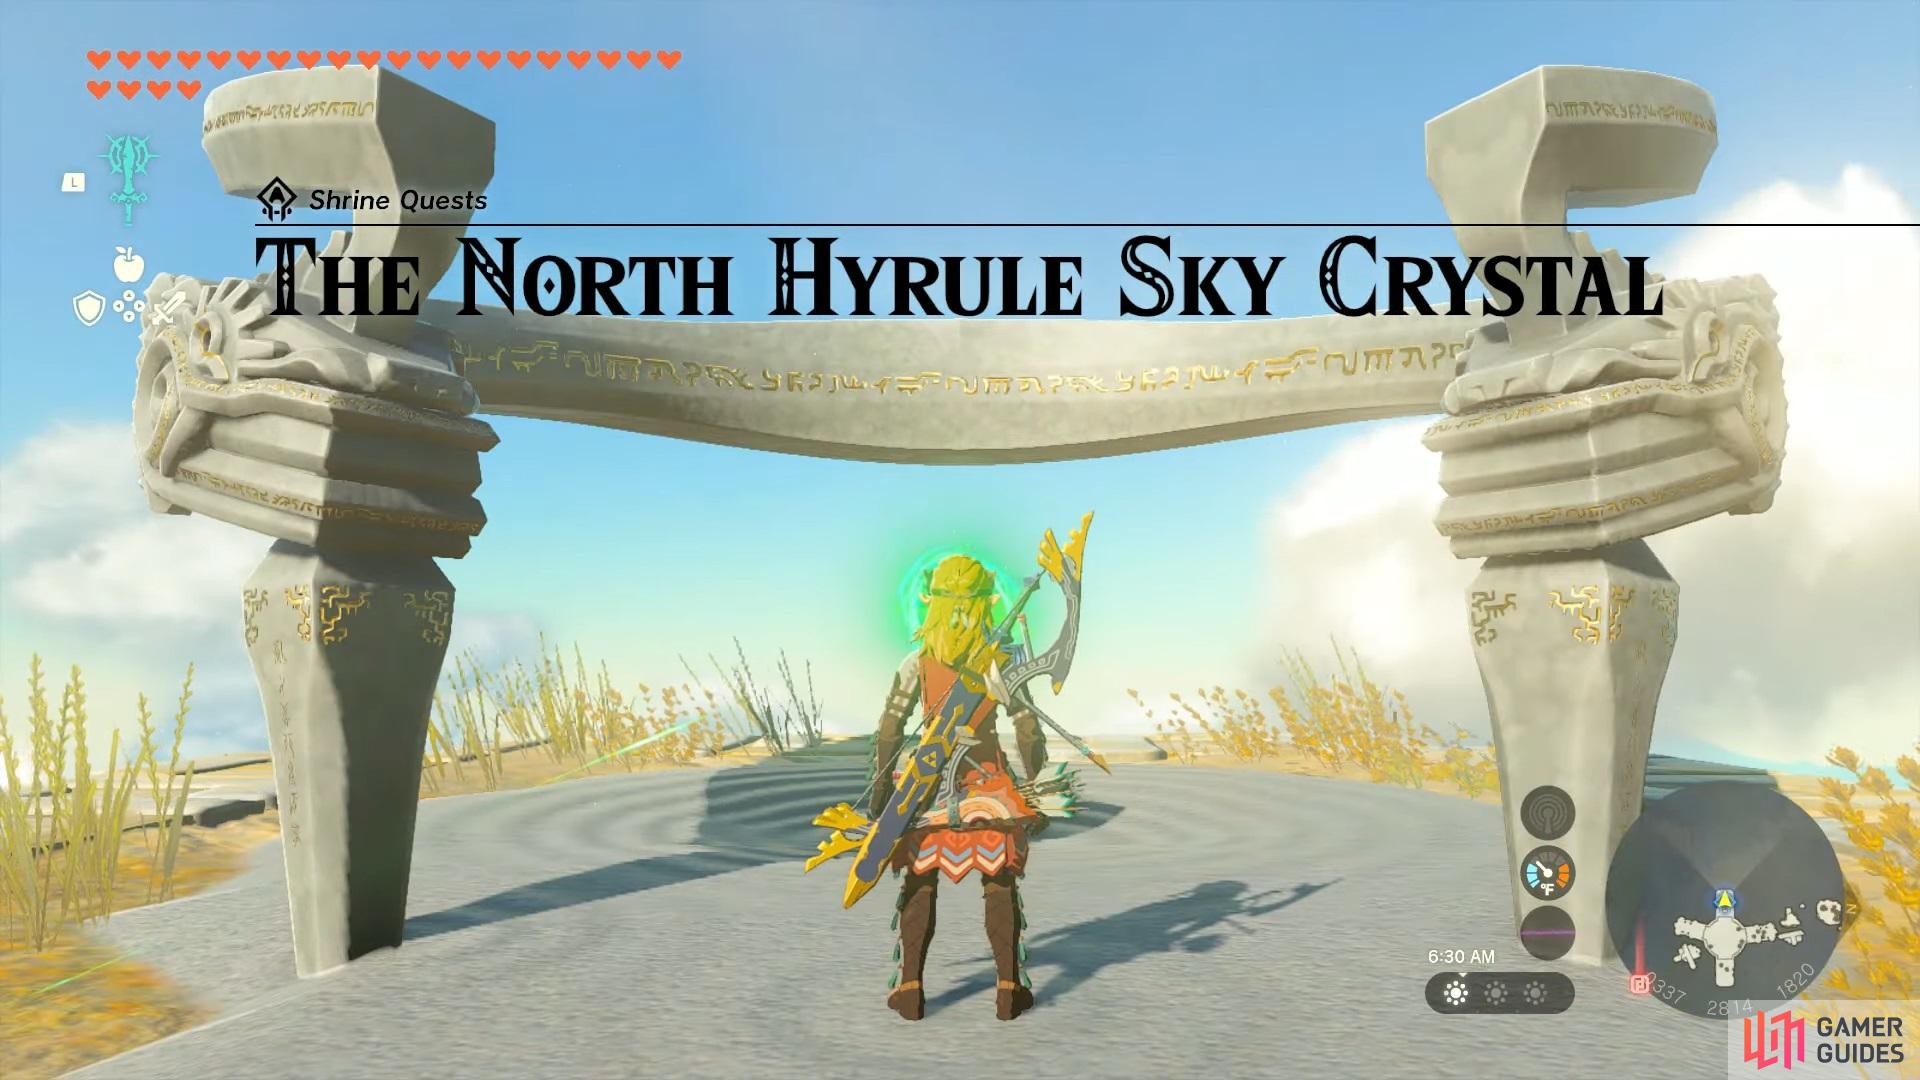 How to Complete The North Hyrule Sky Crystal Shrine Quest - Sky